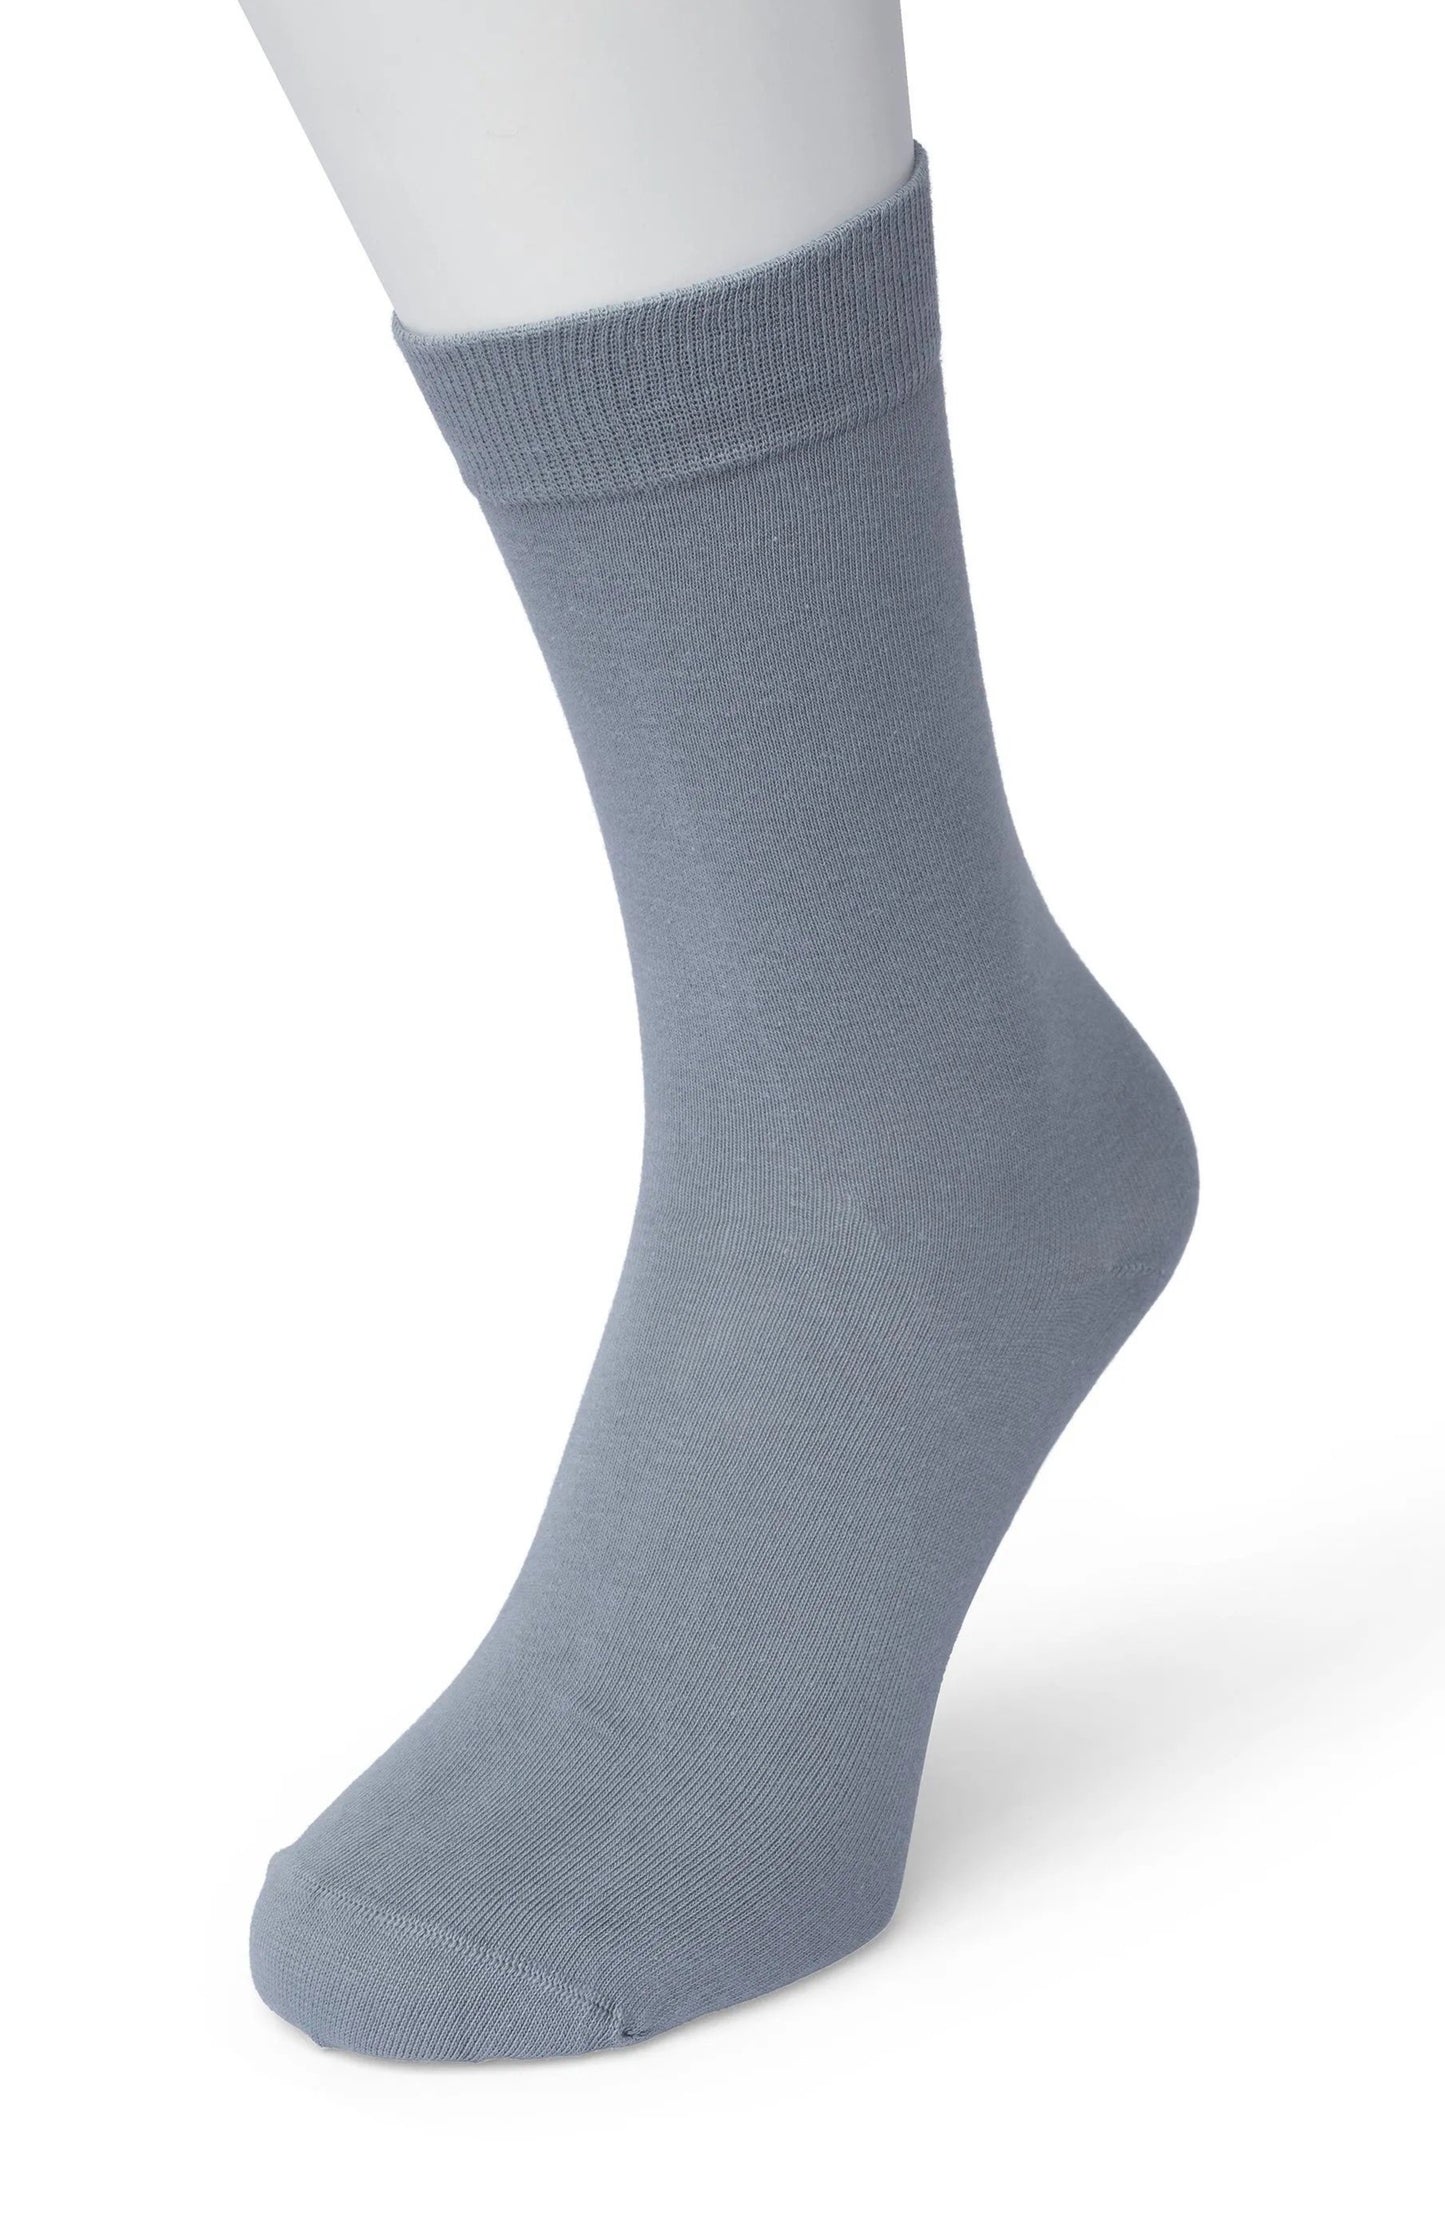 Bonnie Doon 83422 Cotton Sock - light grey ankle socks available in women sizes